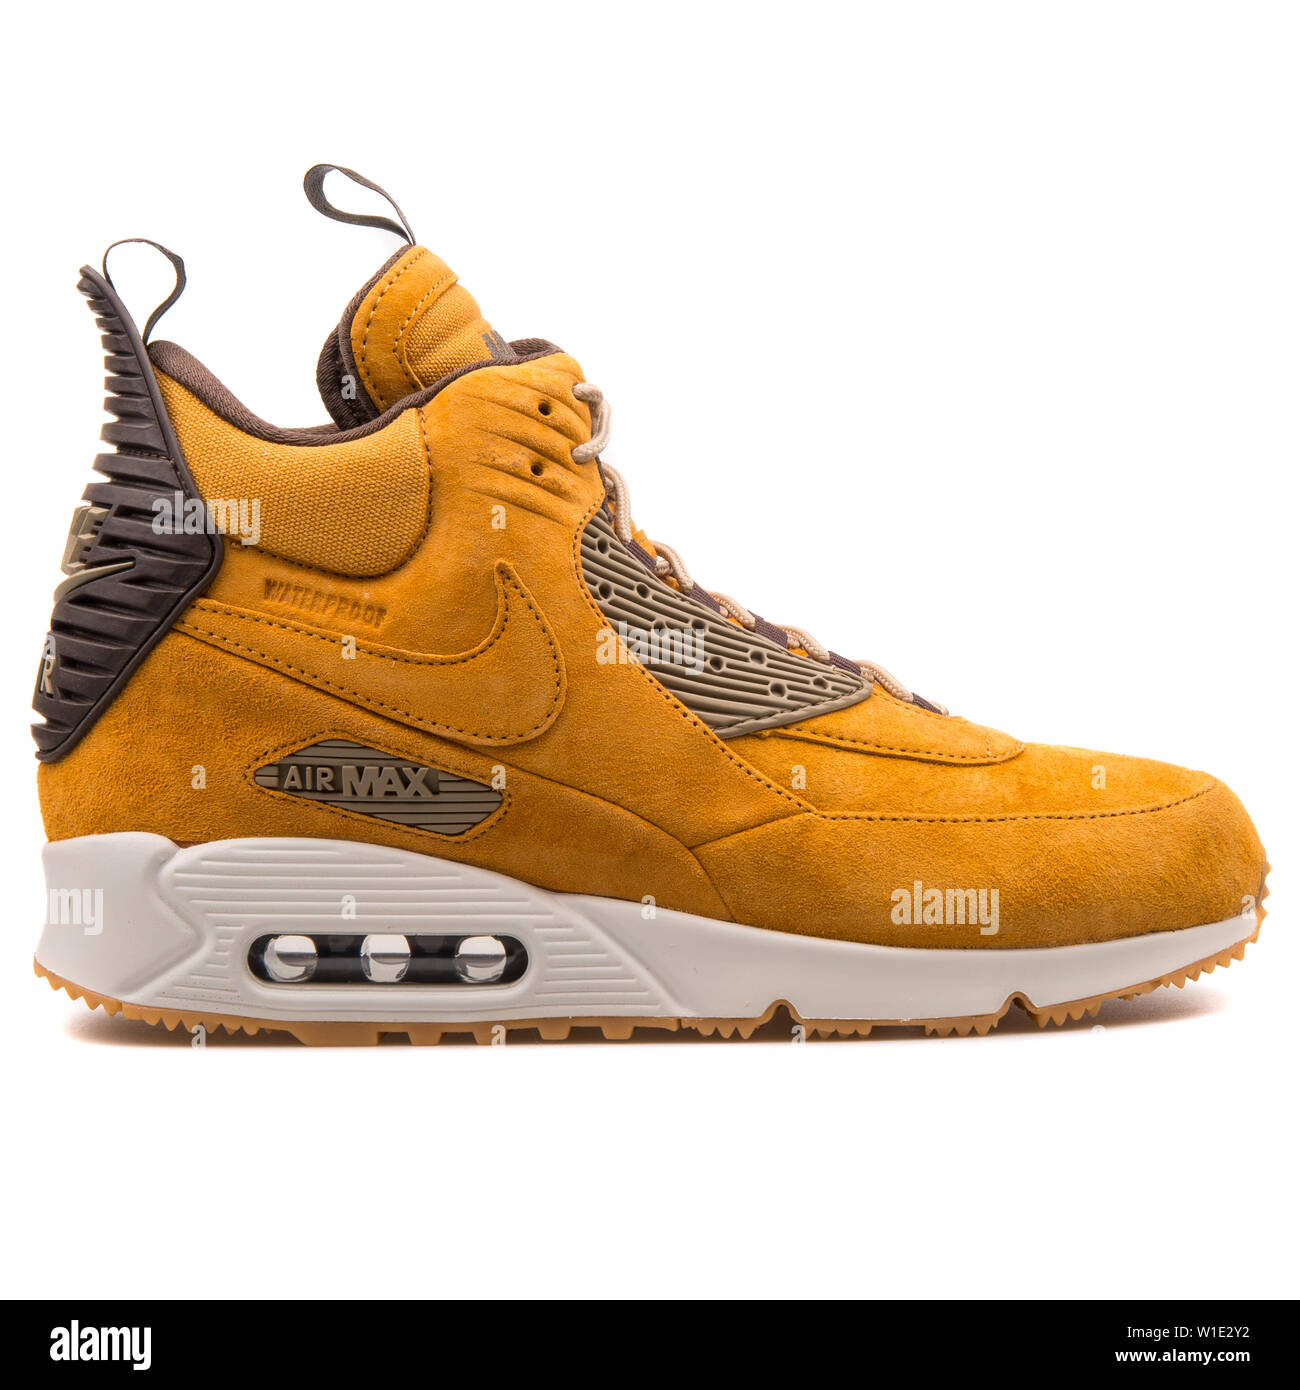 VIENNA, AUSTRIA - AUGUST 25, 2017: Nike Air Max 90 Mid Winter brown and  black sneaker on white background Stock Photo - Alamy